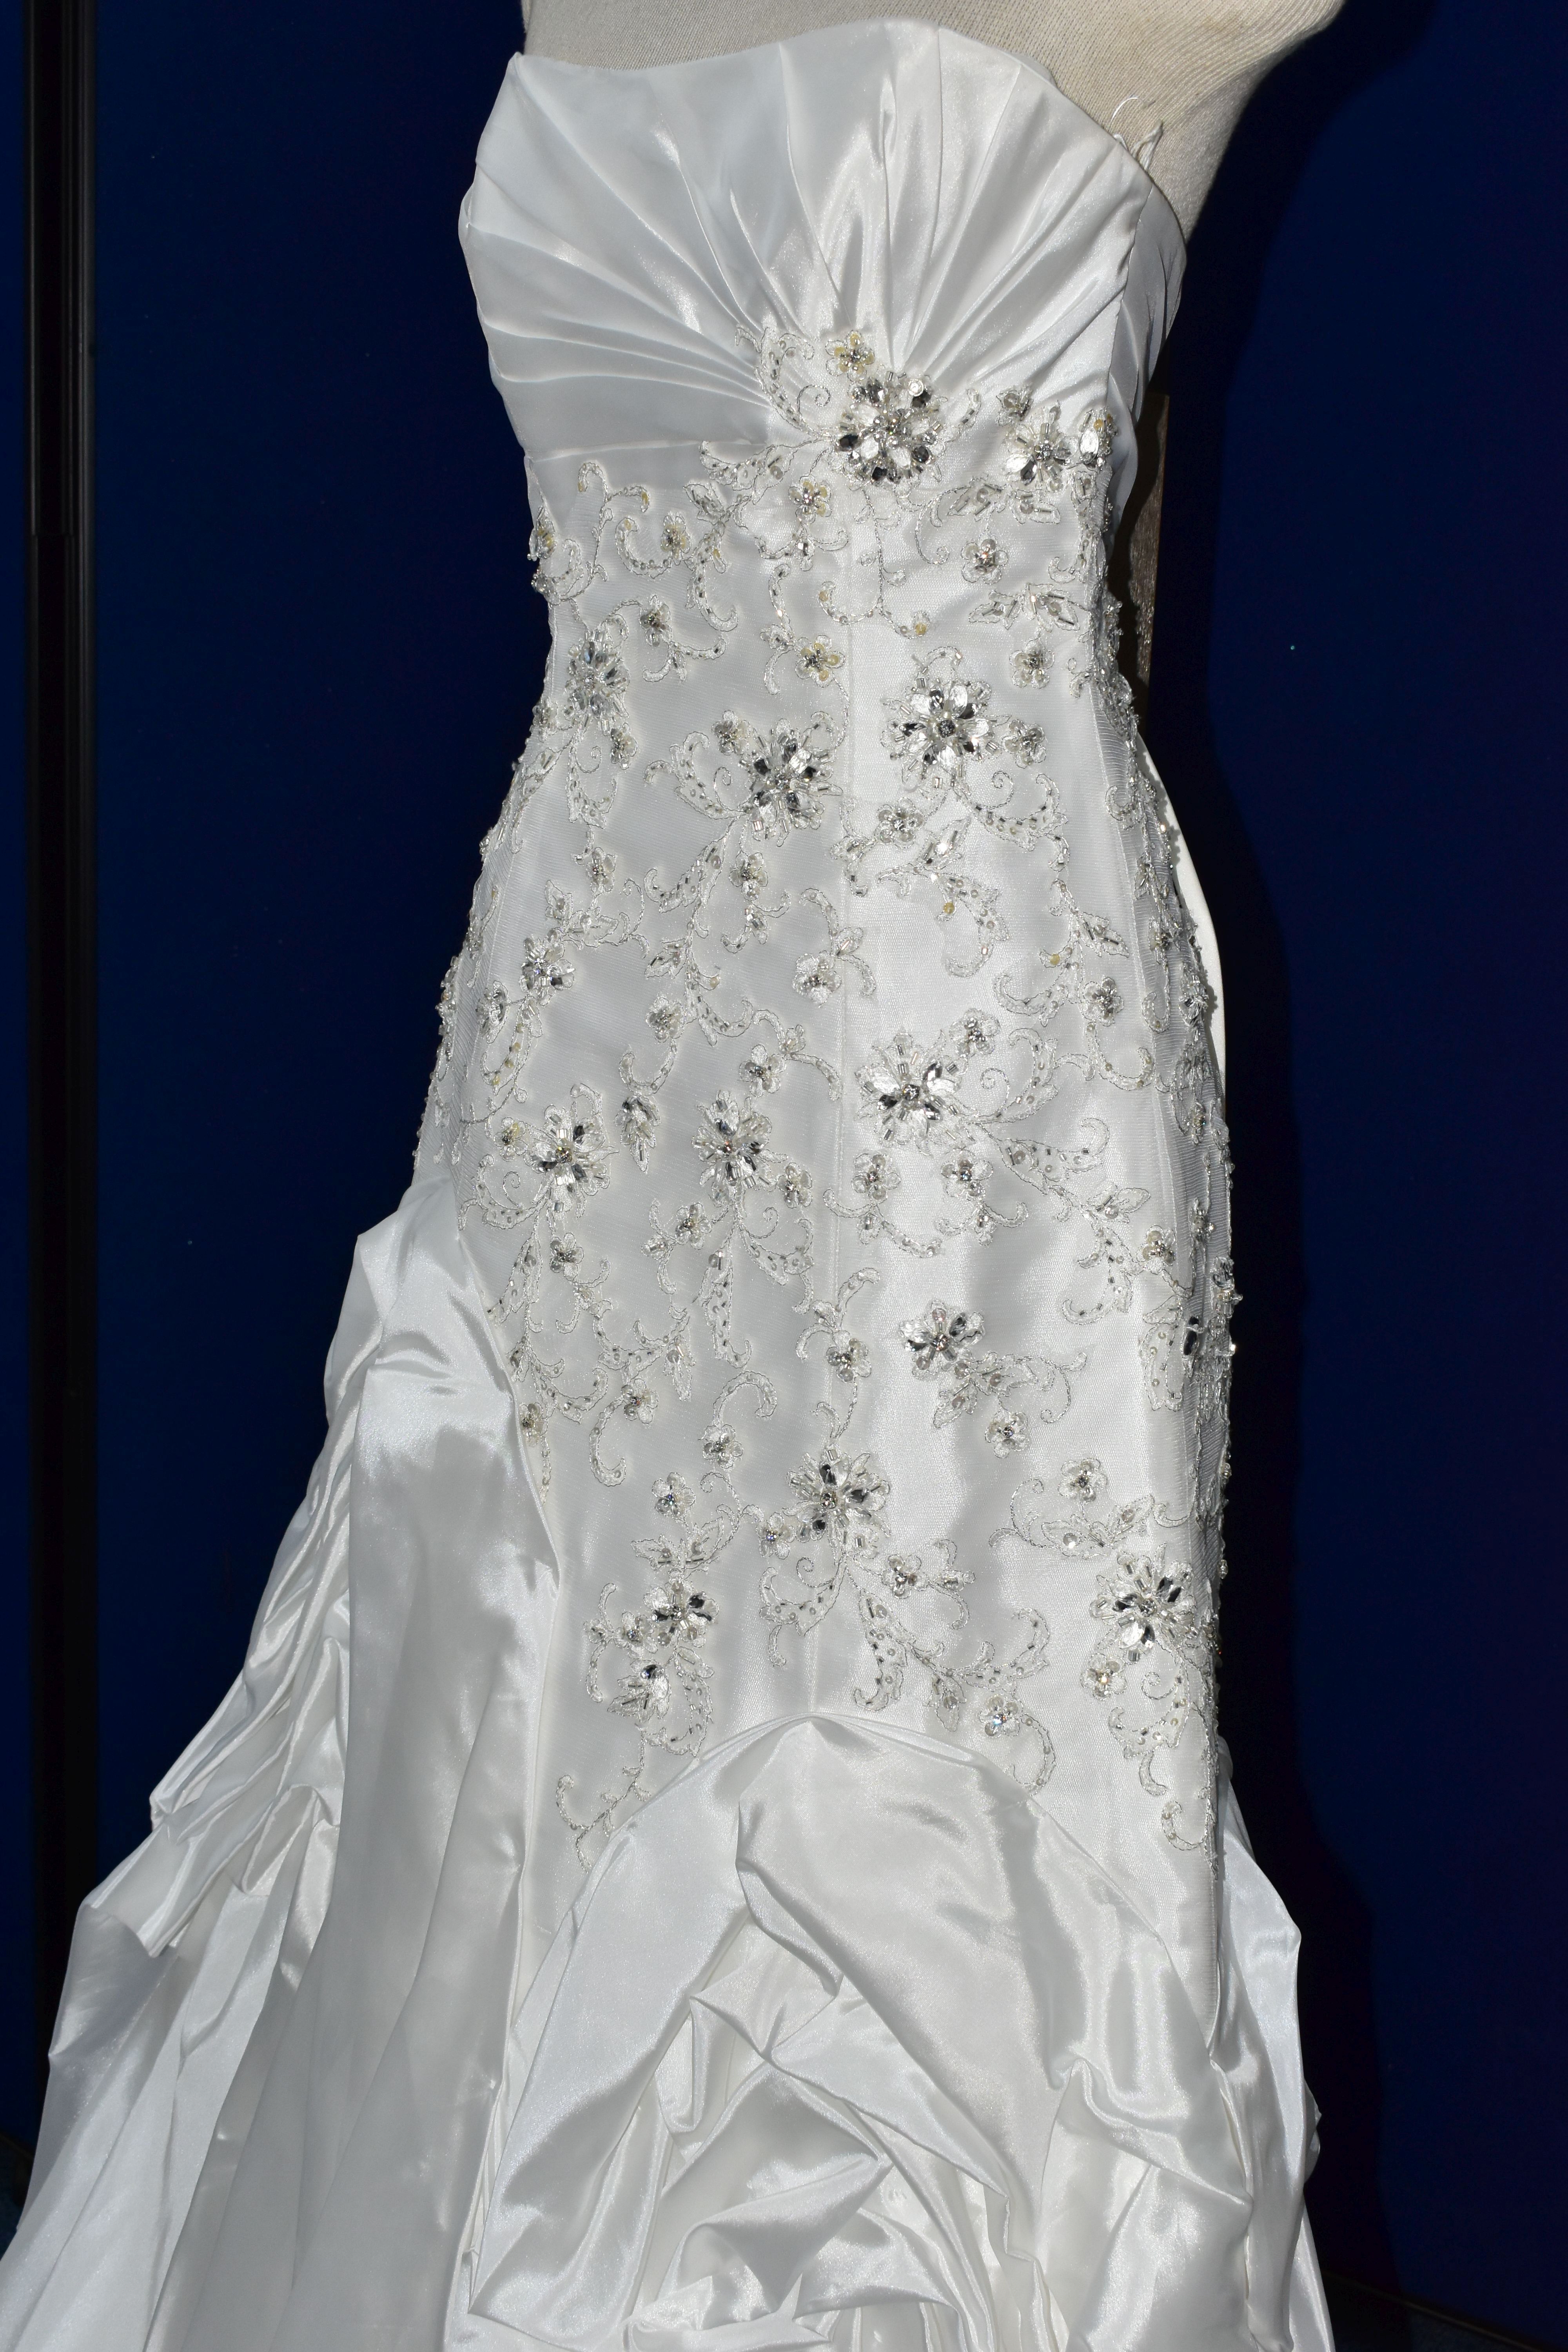 WEDDING GOWN, 'Sophia Tolli' white satin, size 8, strapless, ruched skirt, beaded detail on - Image 9 of 17